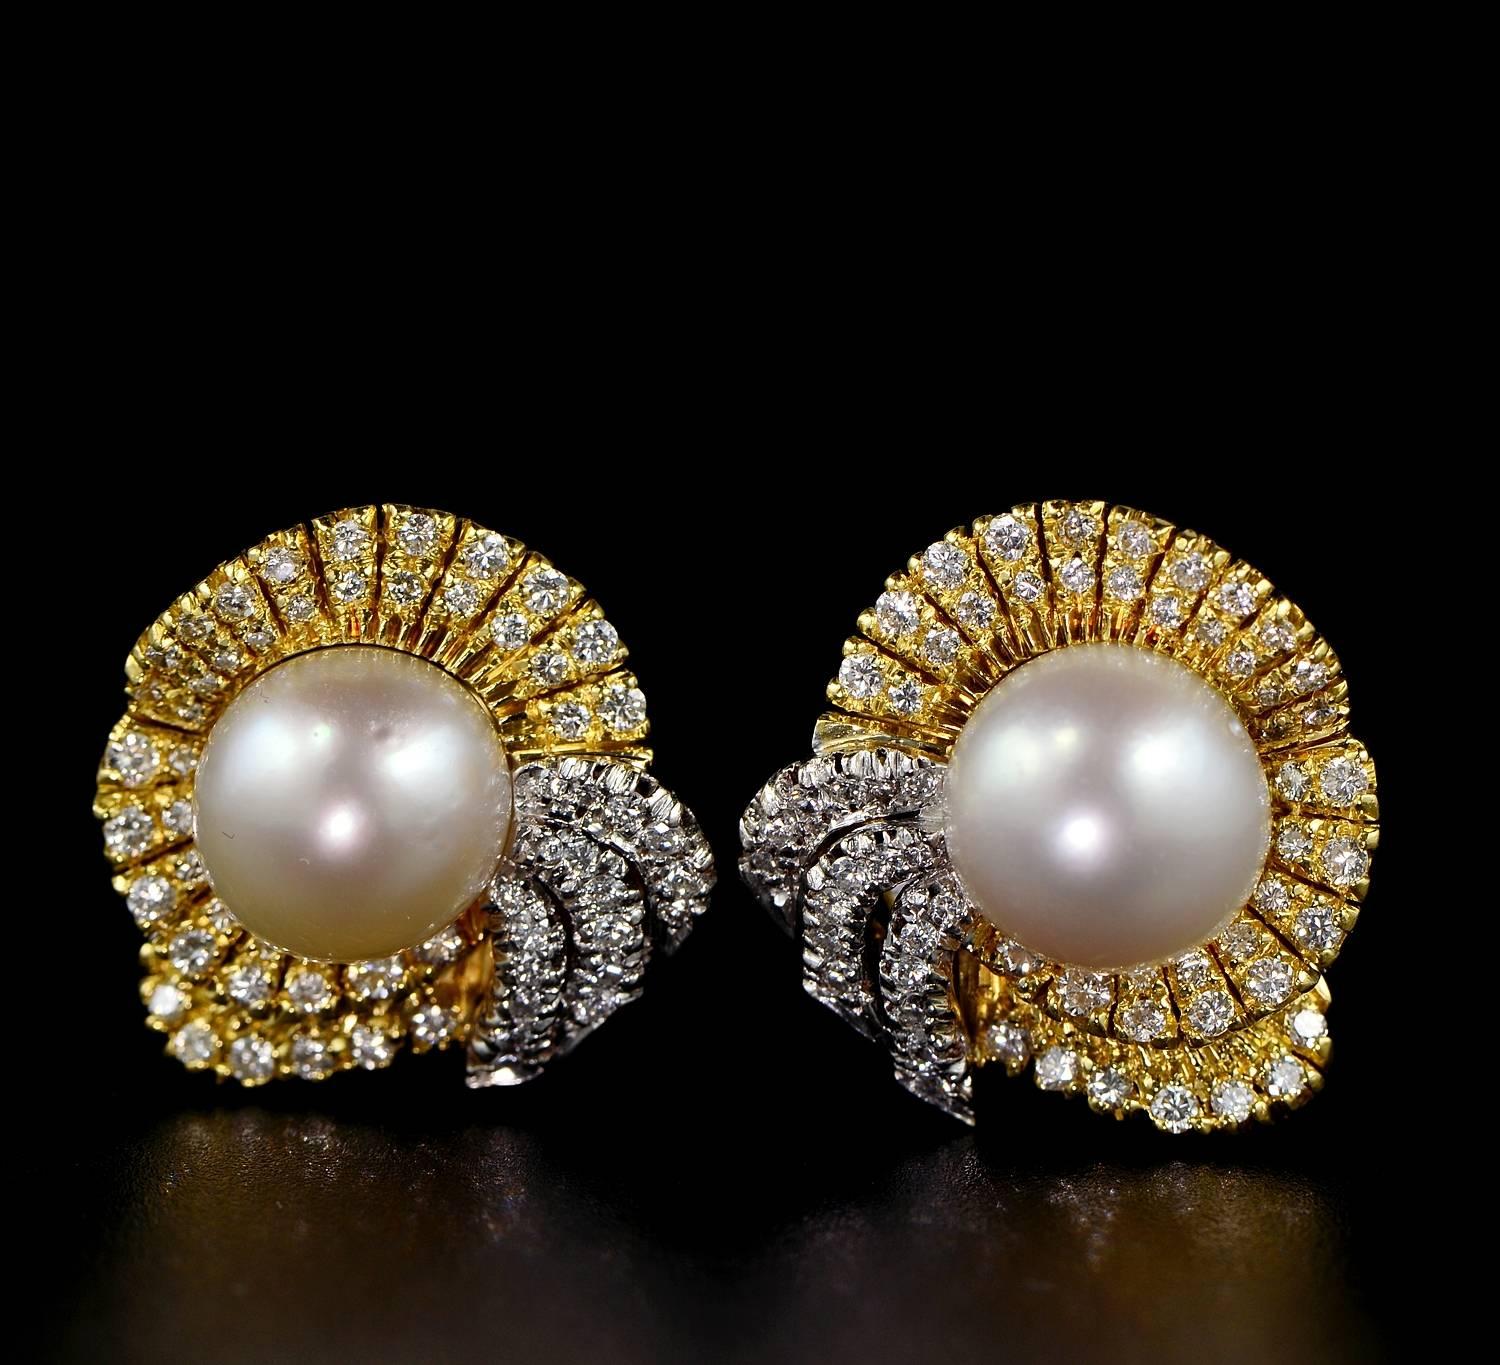 Extremely well hand crafted of good gauge of solid 18 KT gold, 1950 ca Italian Pearl earrings. Of unique bow design, so in vogue during the half of last century.
Set with a couple of large 11 mm. South Sea Pearls of high luster and fabulous